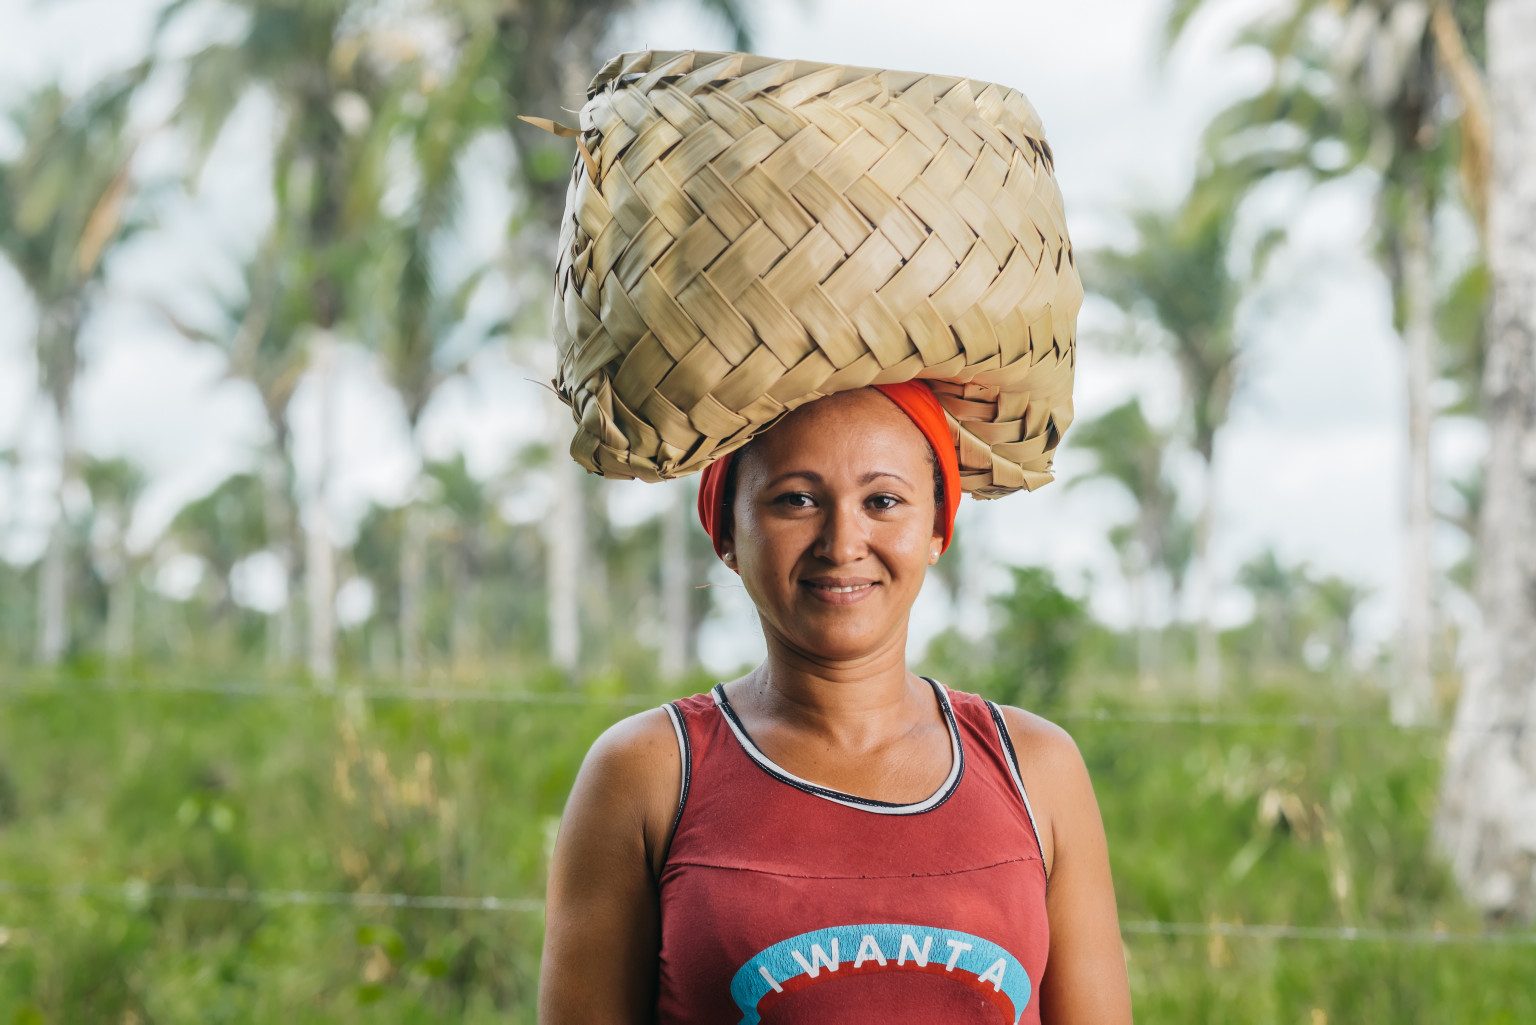  A woman balances a basket of straw on her head and smiles for a photo. In the background there are some trees